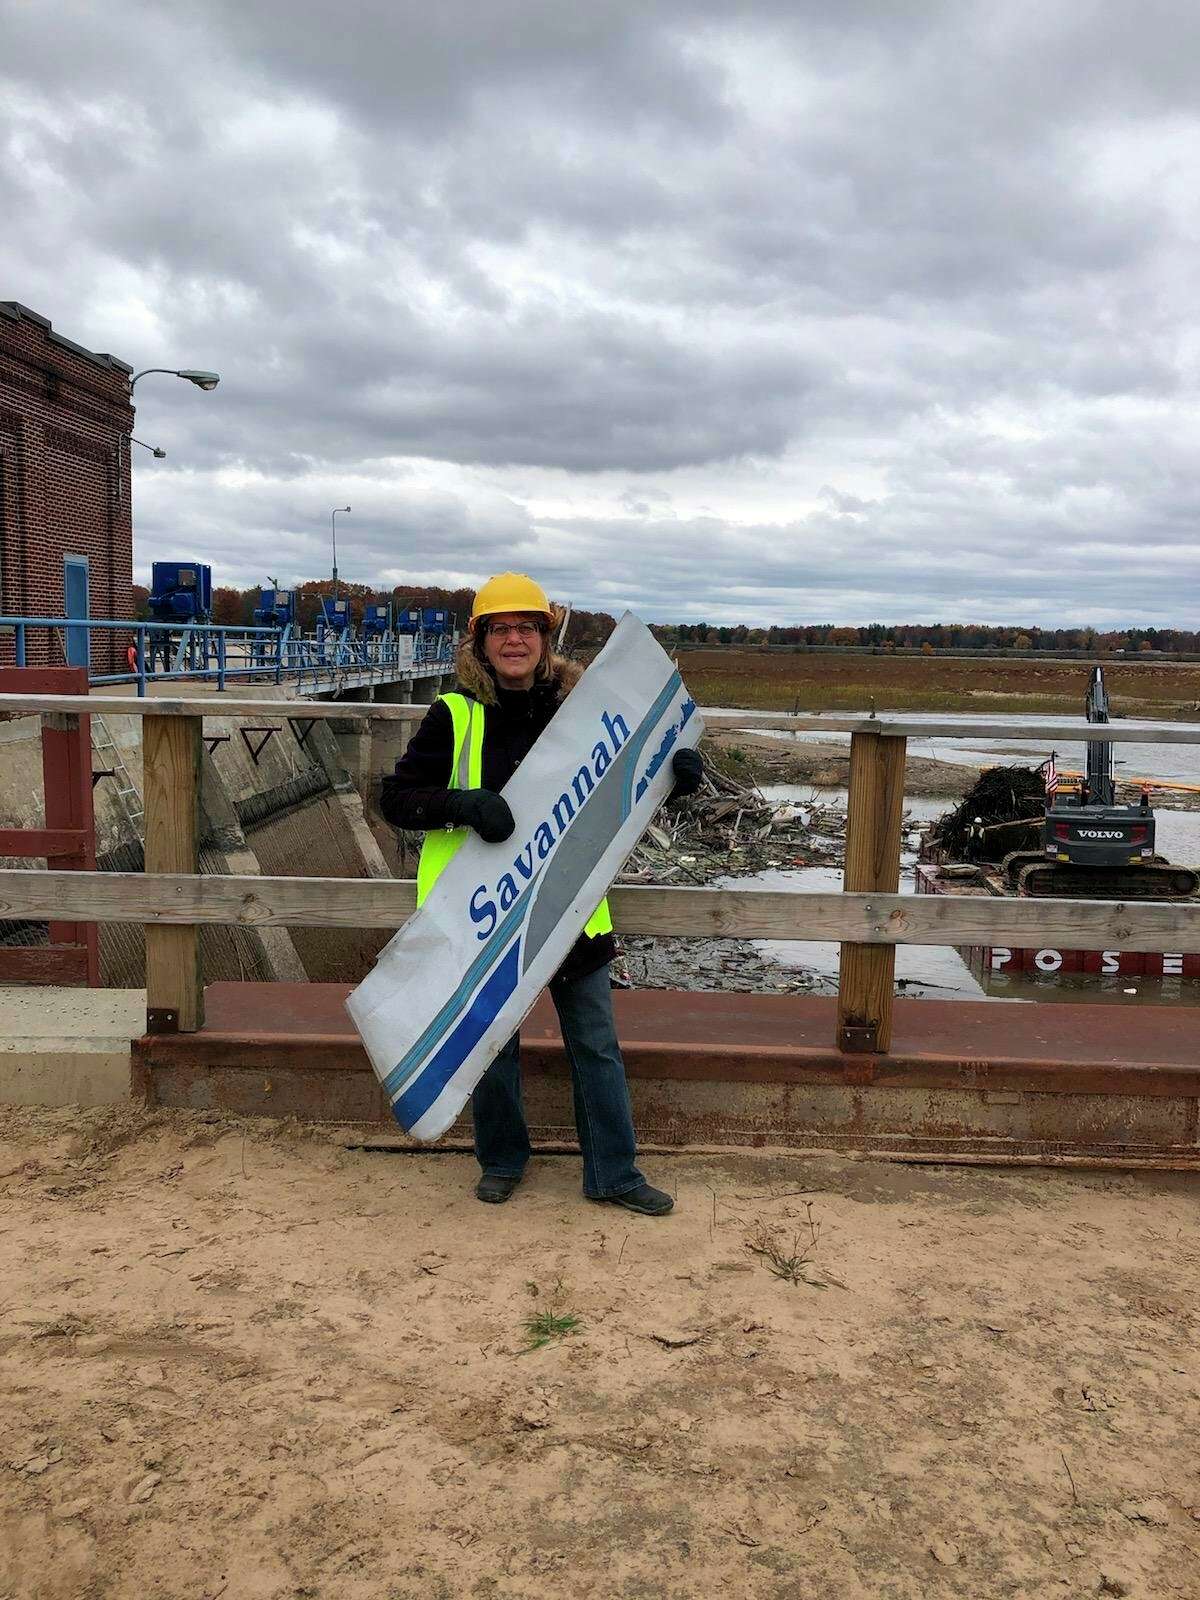 Dolores Porte holds the "Savannah" sign that was salvaged from her Crest Savannah pontoon boat that was removed from the water near the Sanford Dam on Thursday. (Photo provided/Dolores Porte)